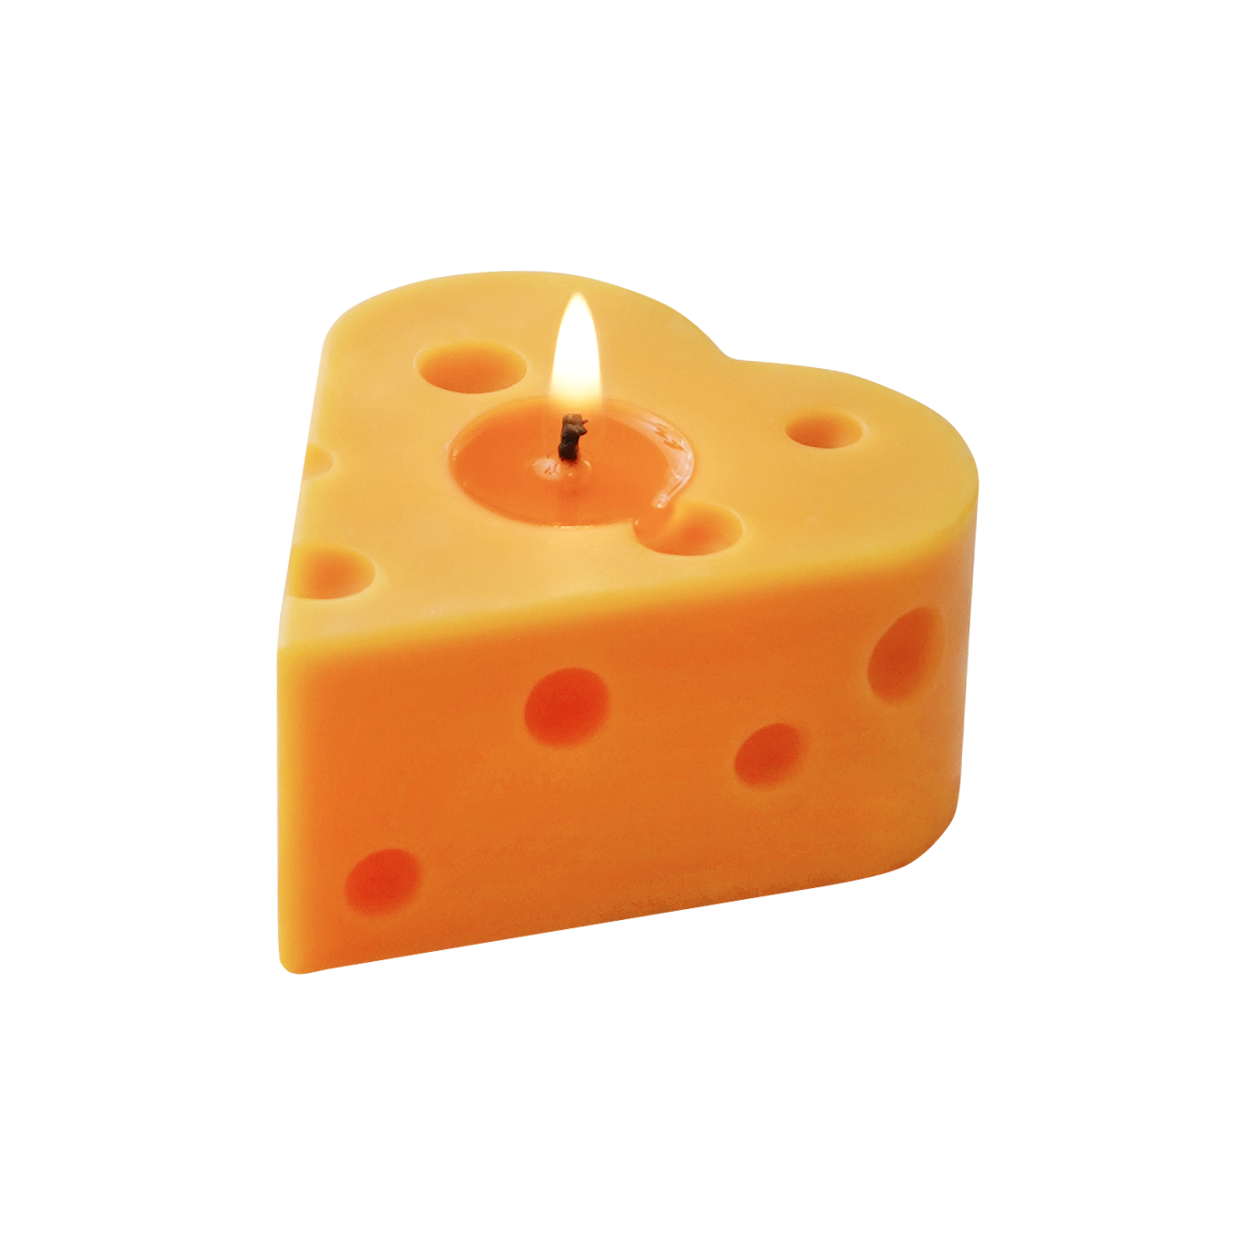 a lit heart-shaped cheese candl